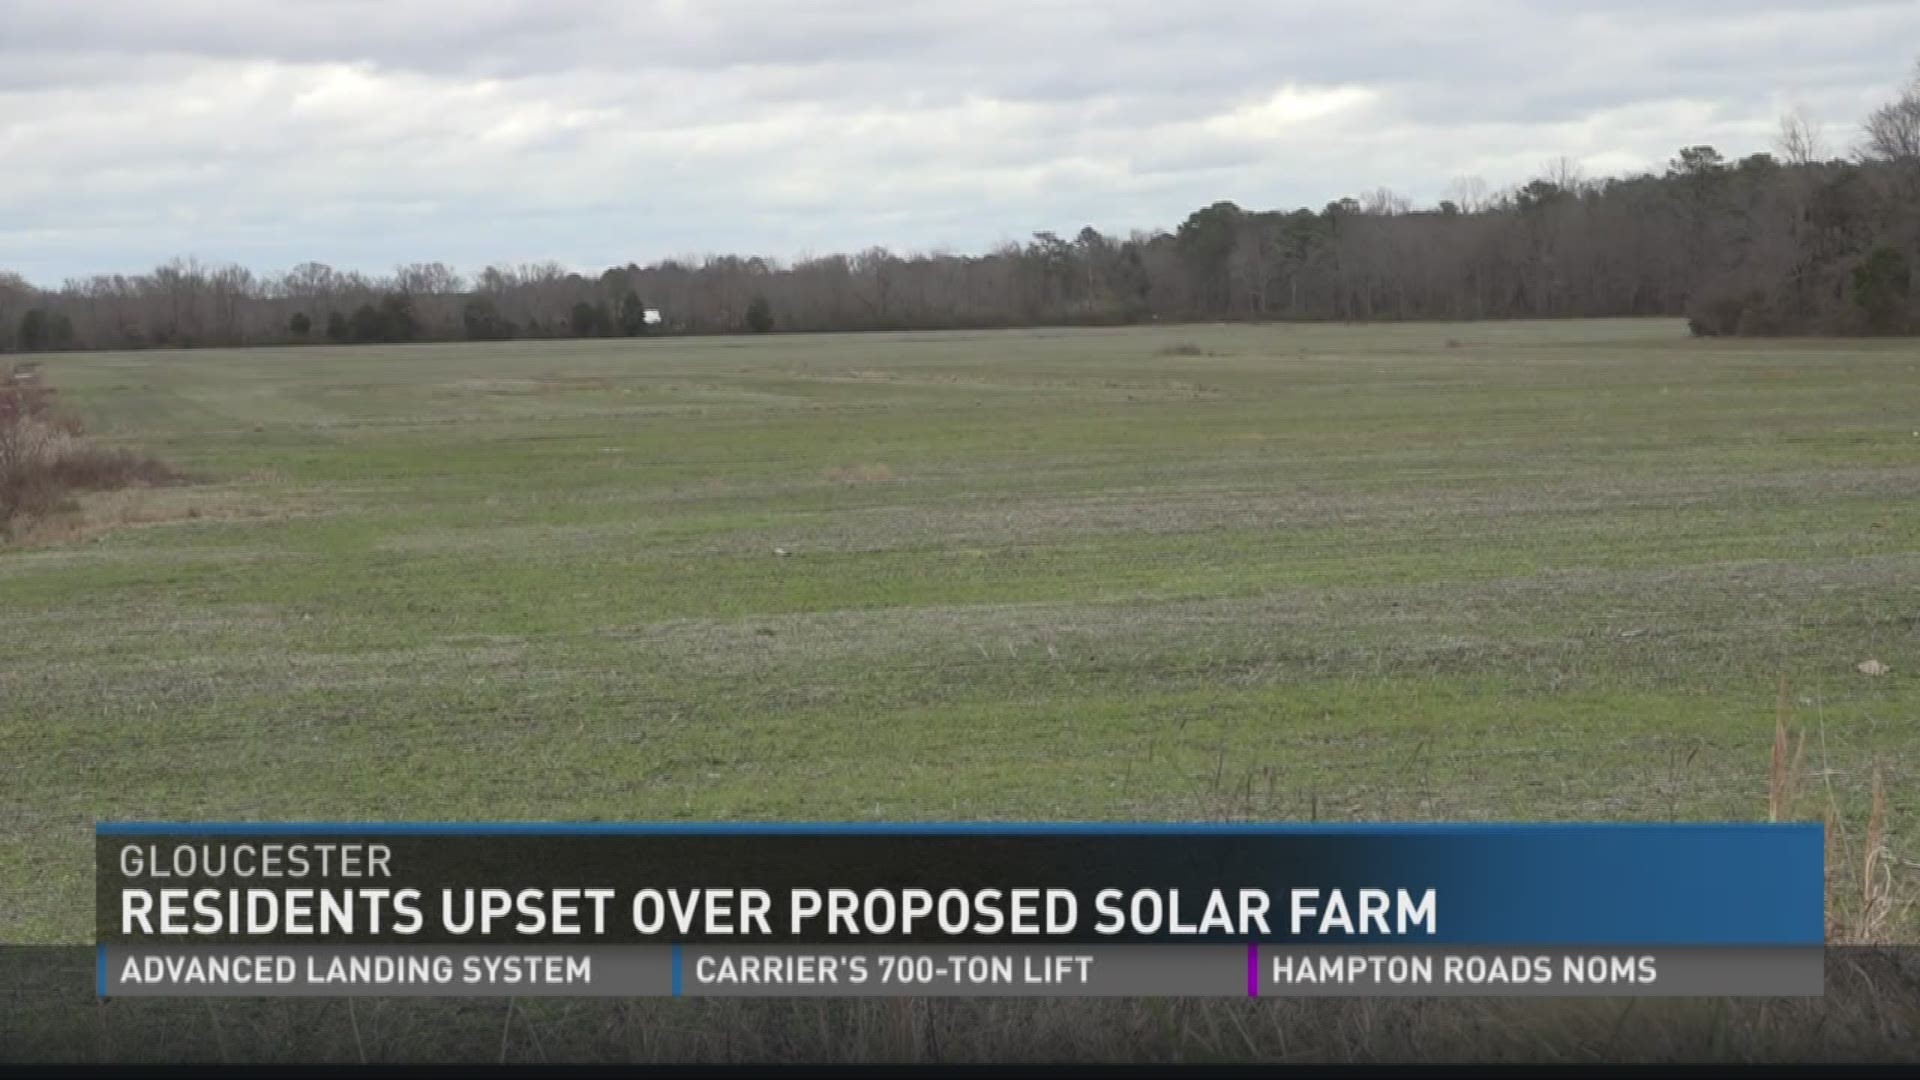 Residents upset over proposed solar farm in Gloucester